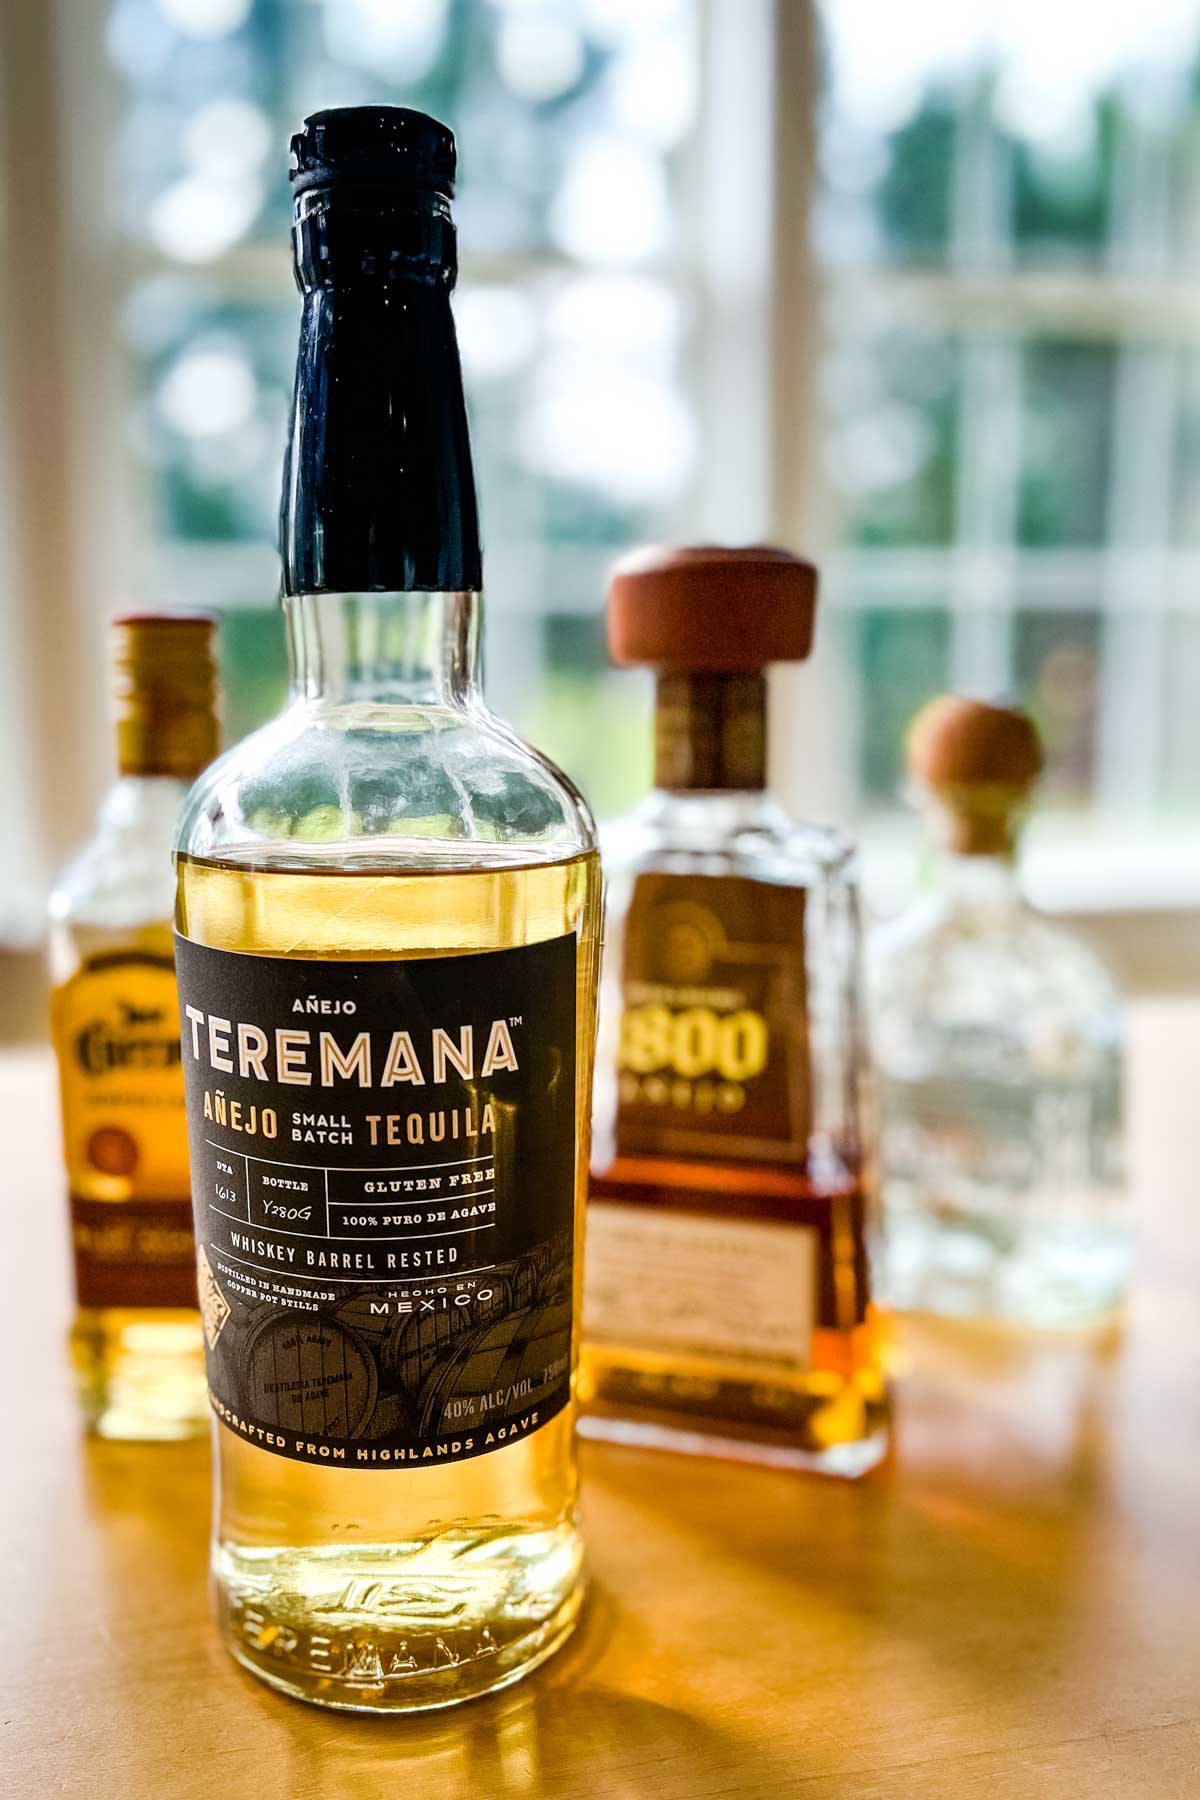 A bottle of Teremana tequila on a wood table with a few more bottles of different brands blrured in the background.